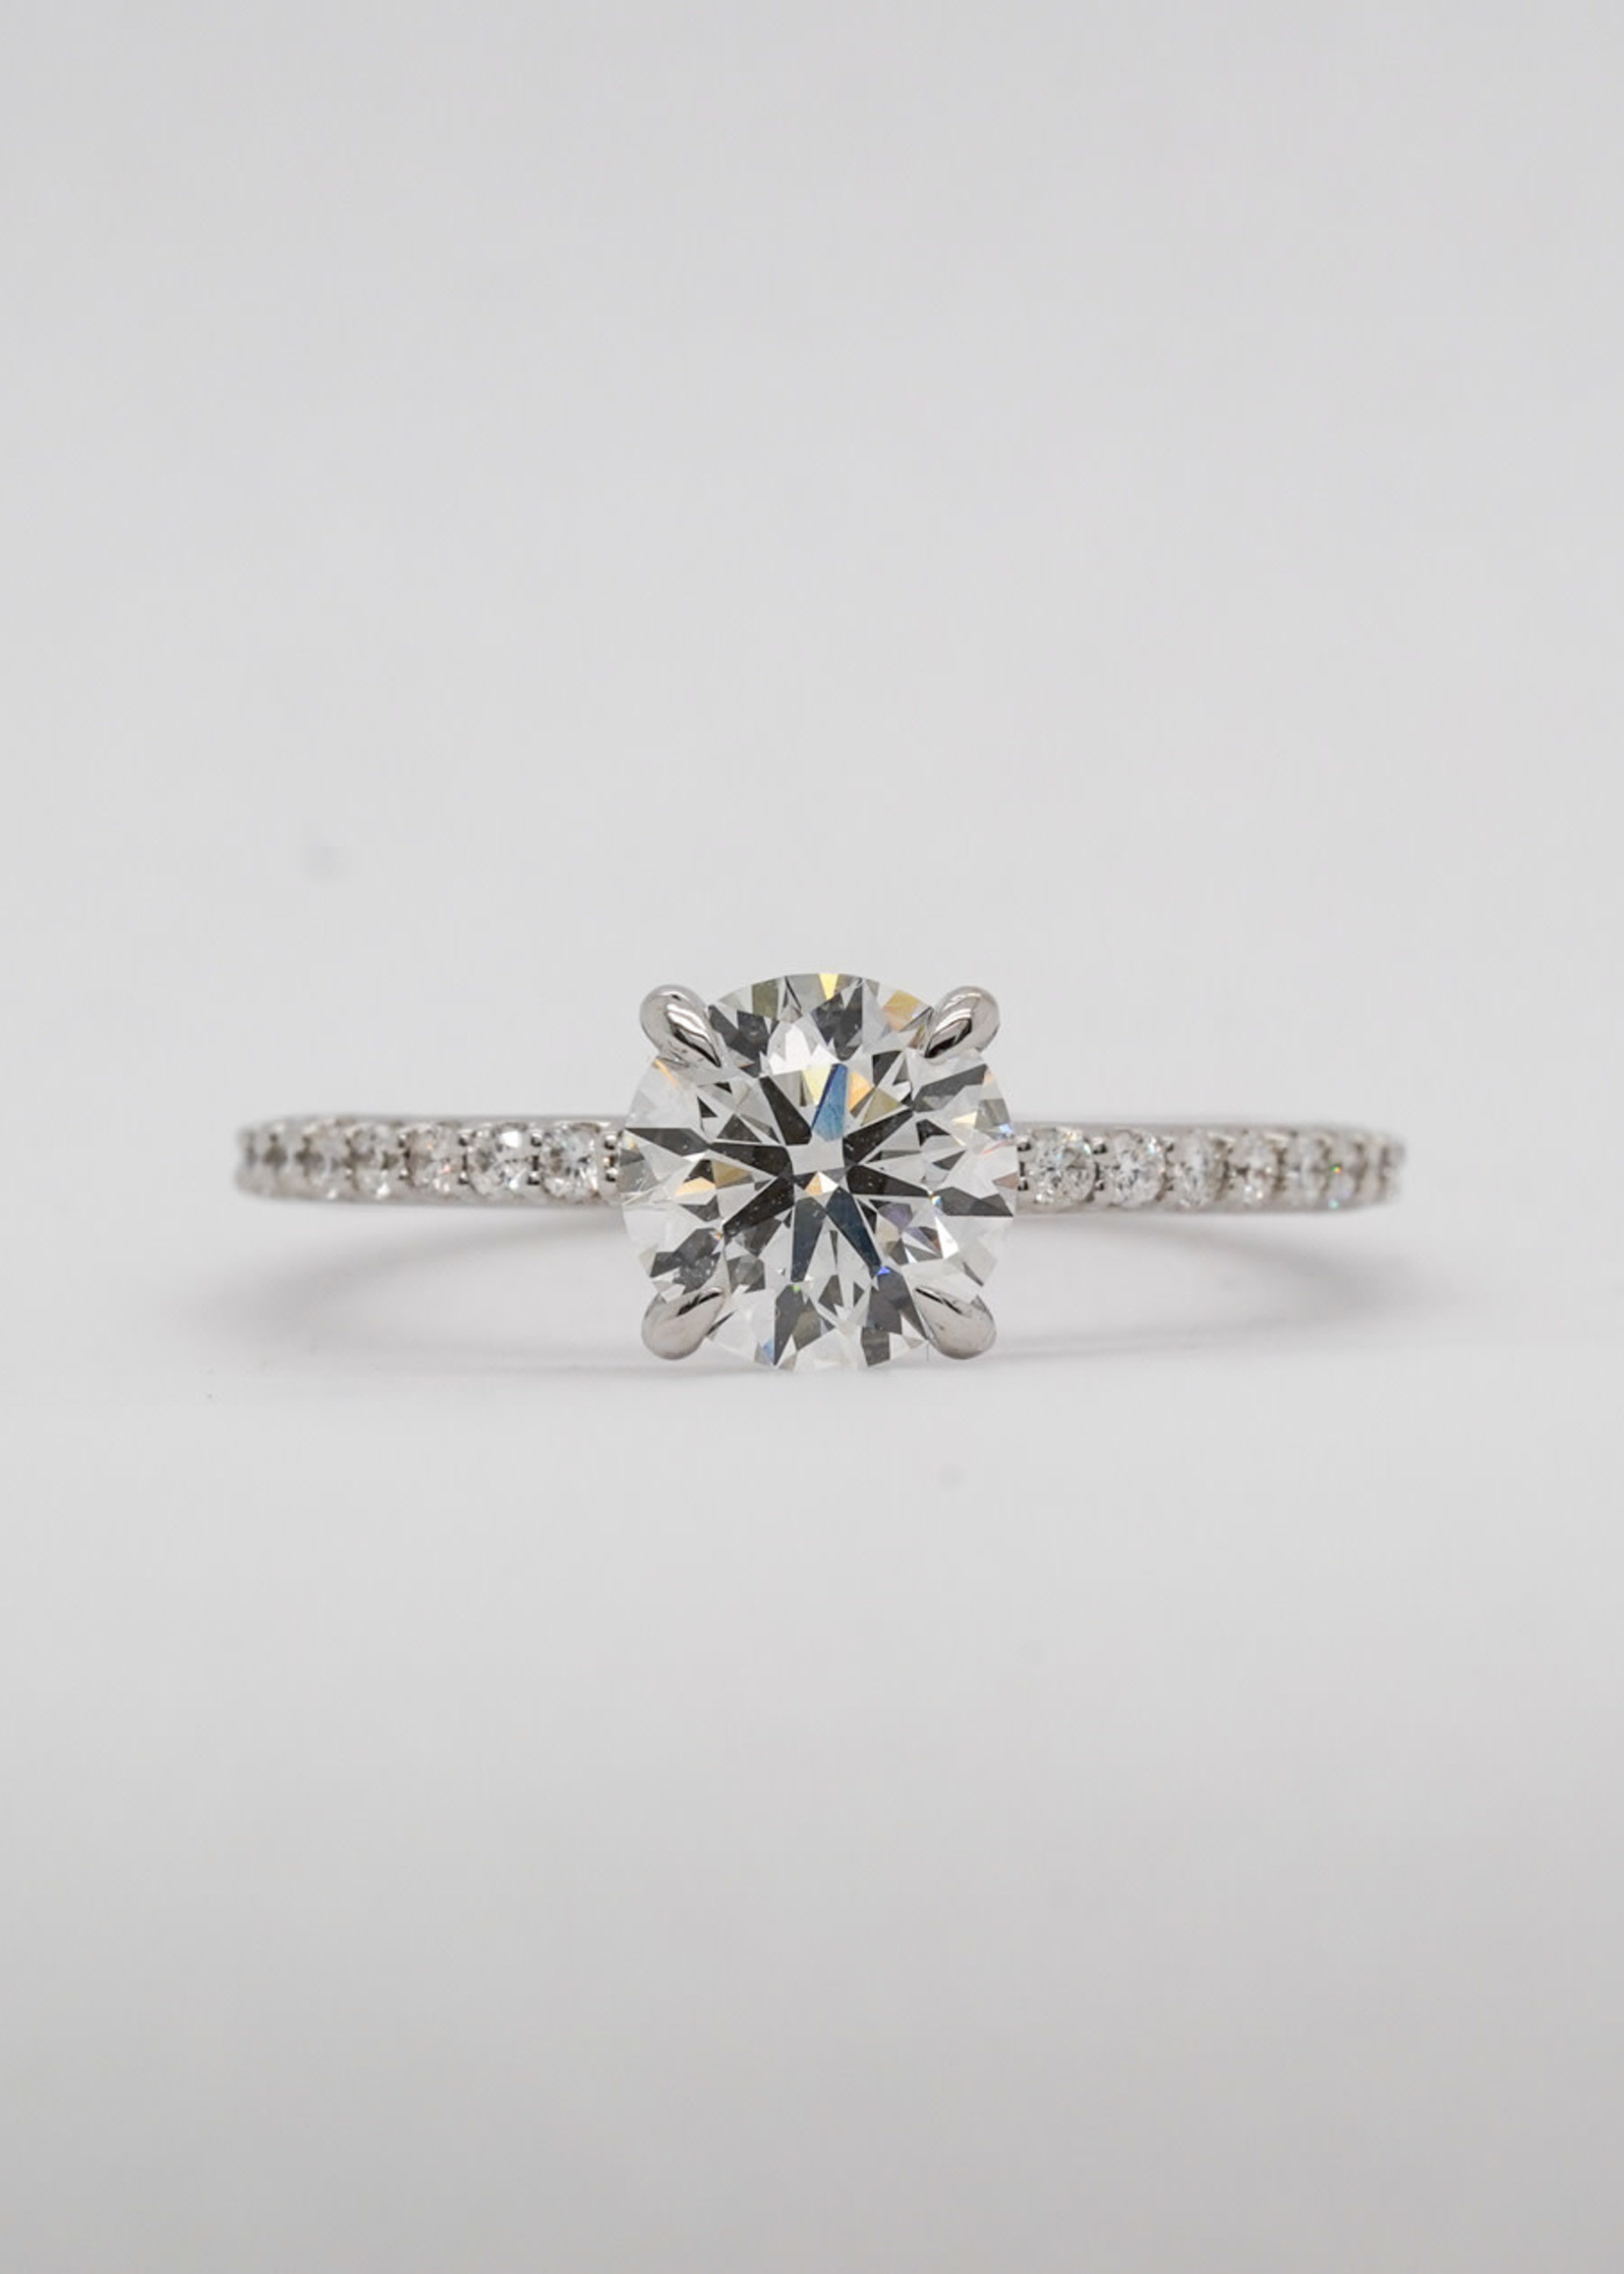 14KW 2.55g 1.69ctw ( 1.33ctr) H/SI1 Round Diamond Hidden Halo Engagement Ring (size 7)